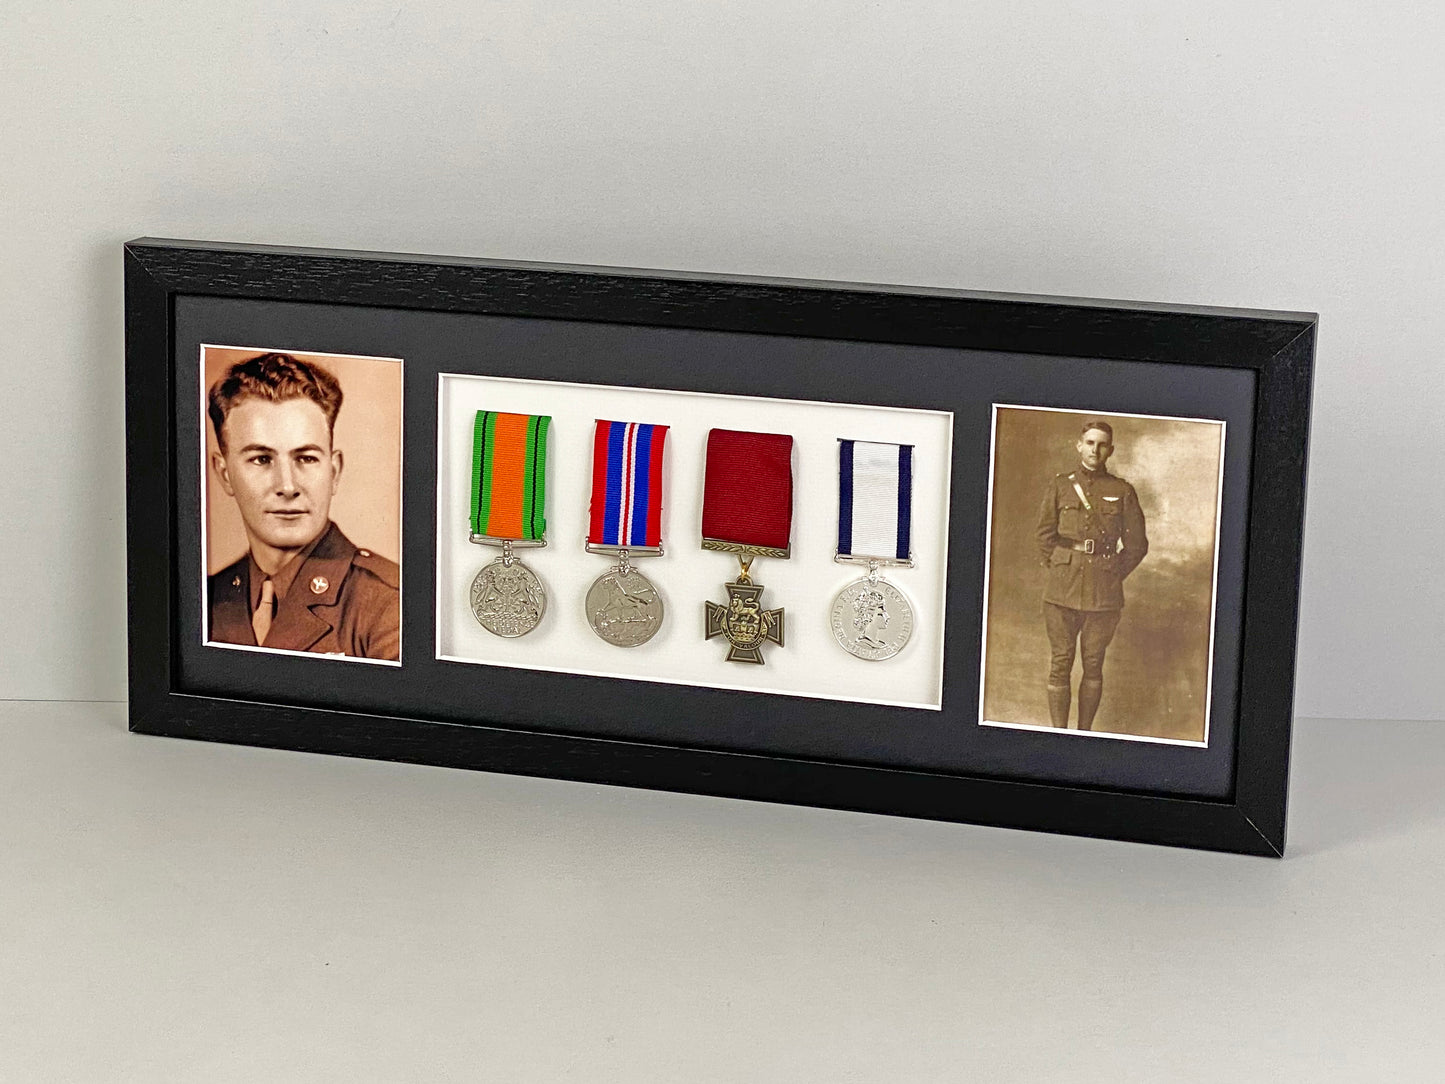 Military and Service Medal display Frame for Four Medals and Two 6x4" Photographs. 20x50cm.